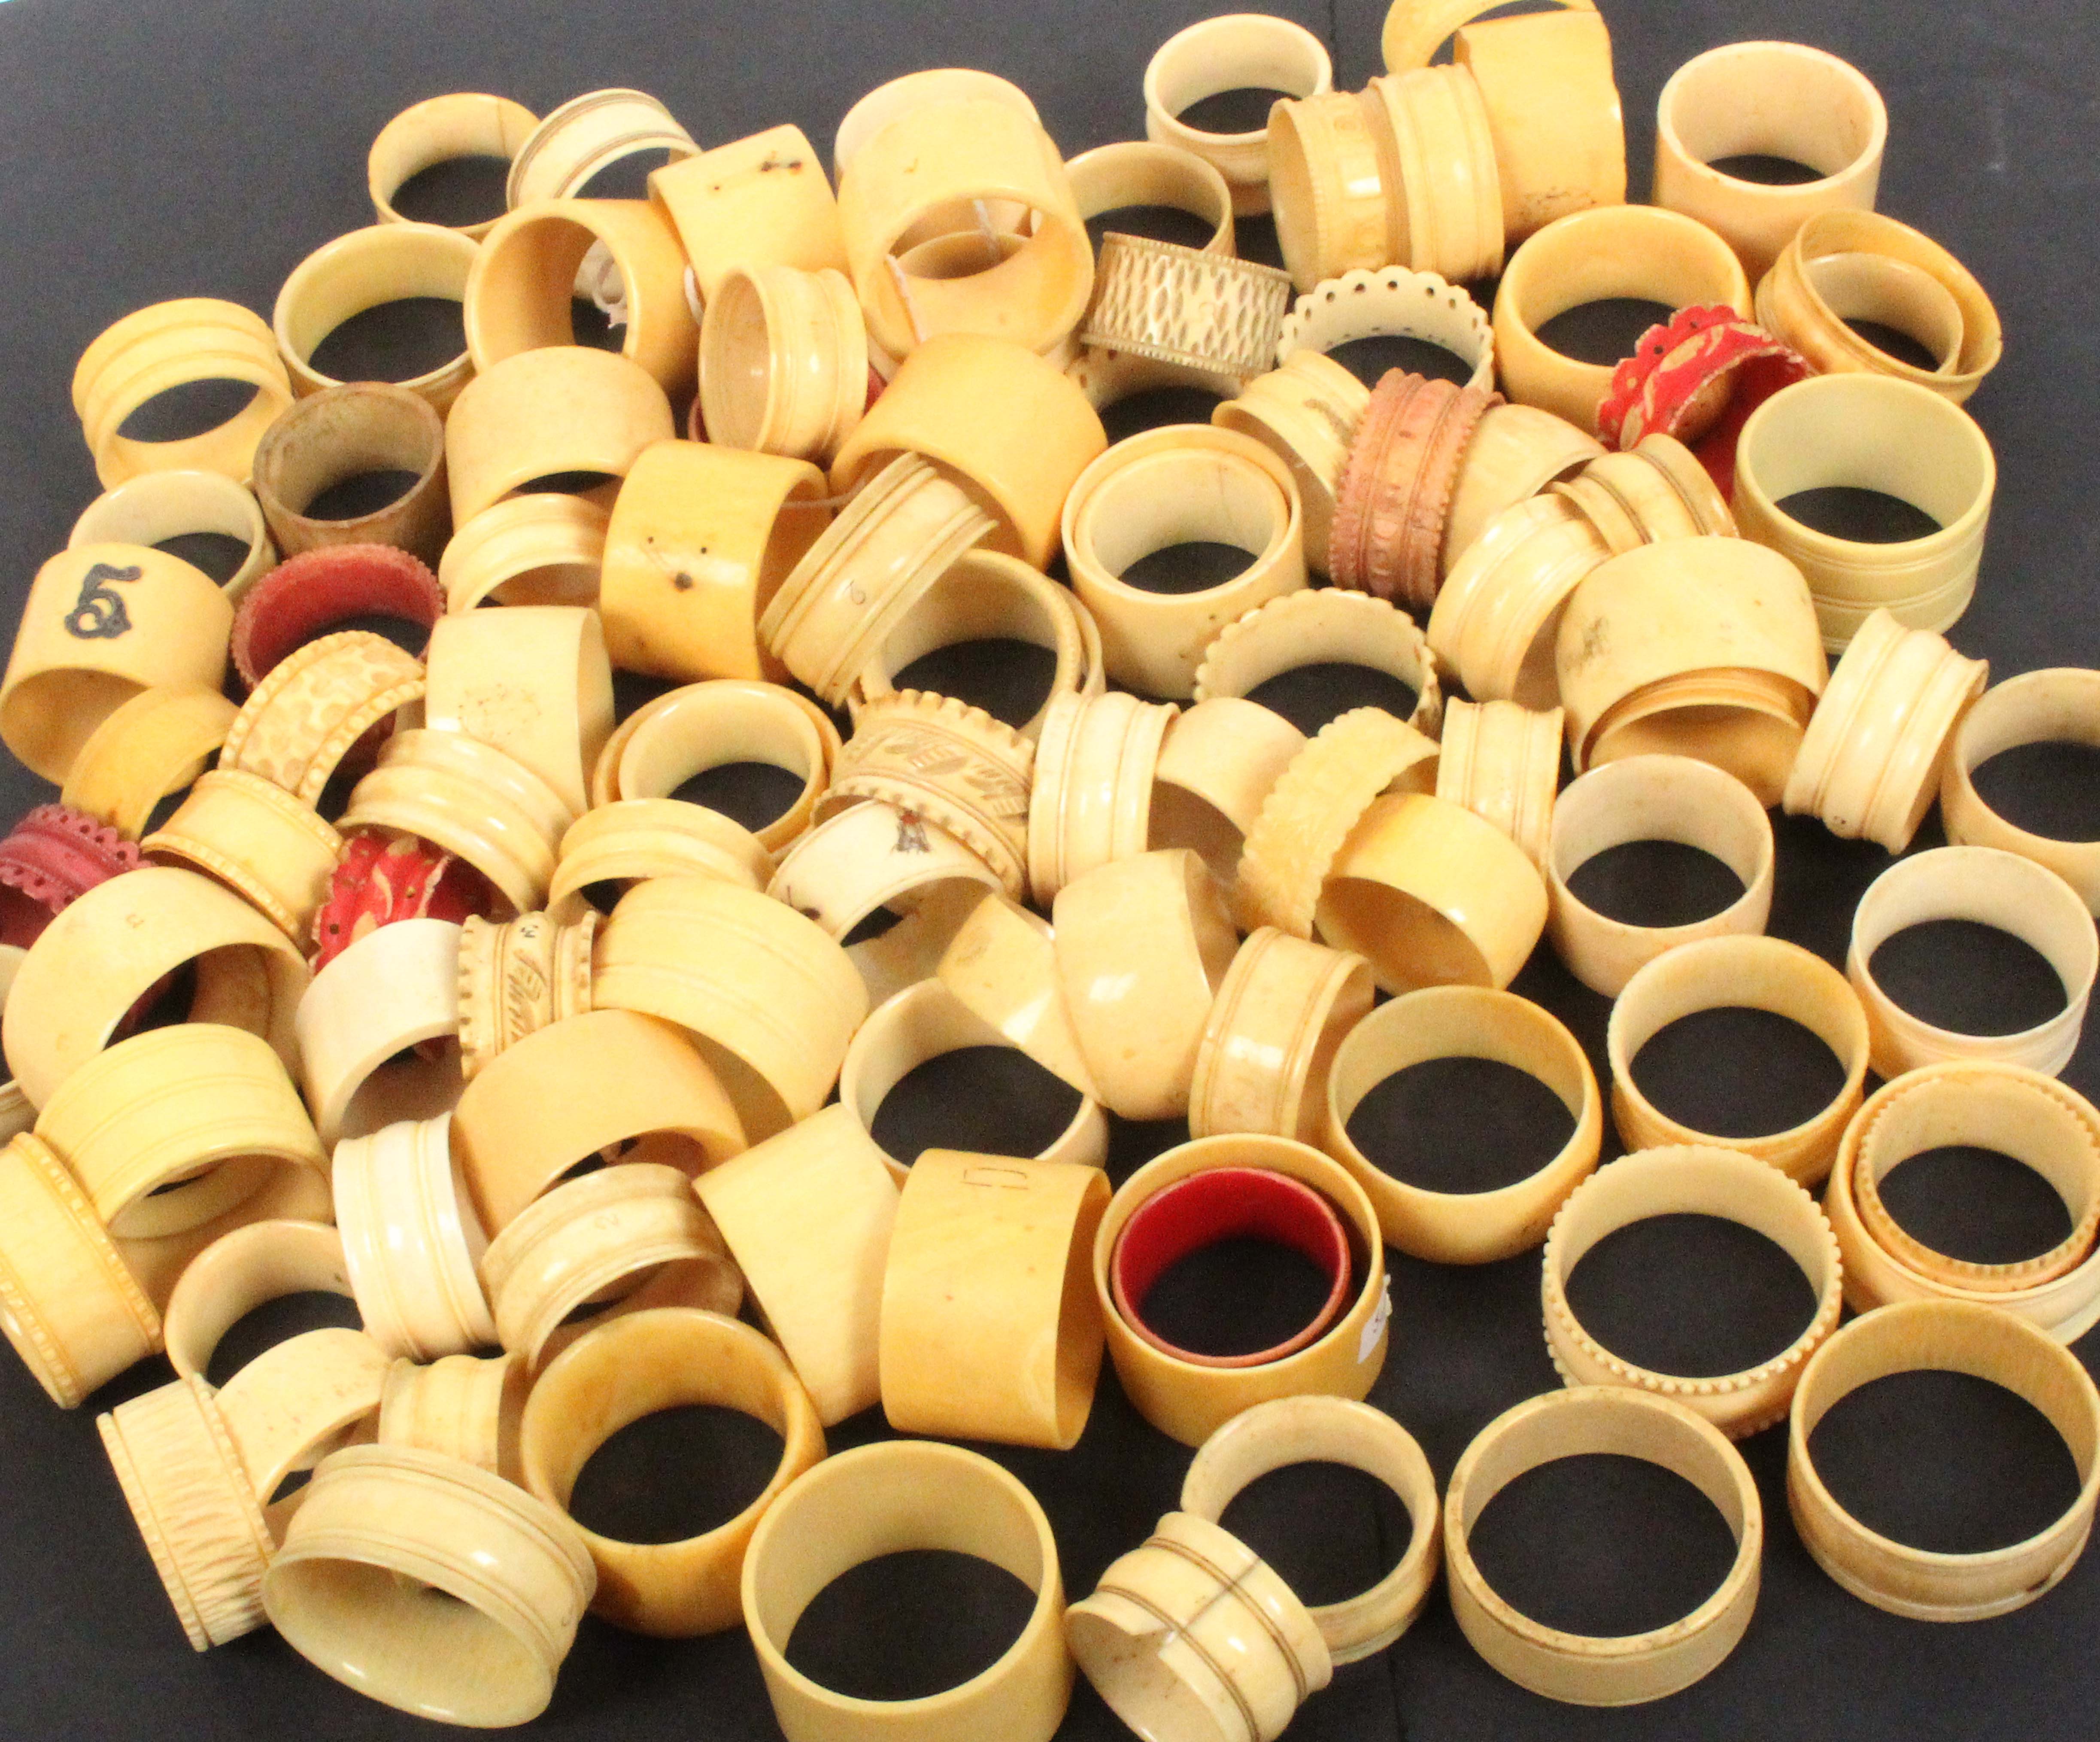 Napkin rings – one hundred plus, 19th Century ivory and bone examples.     (100+)